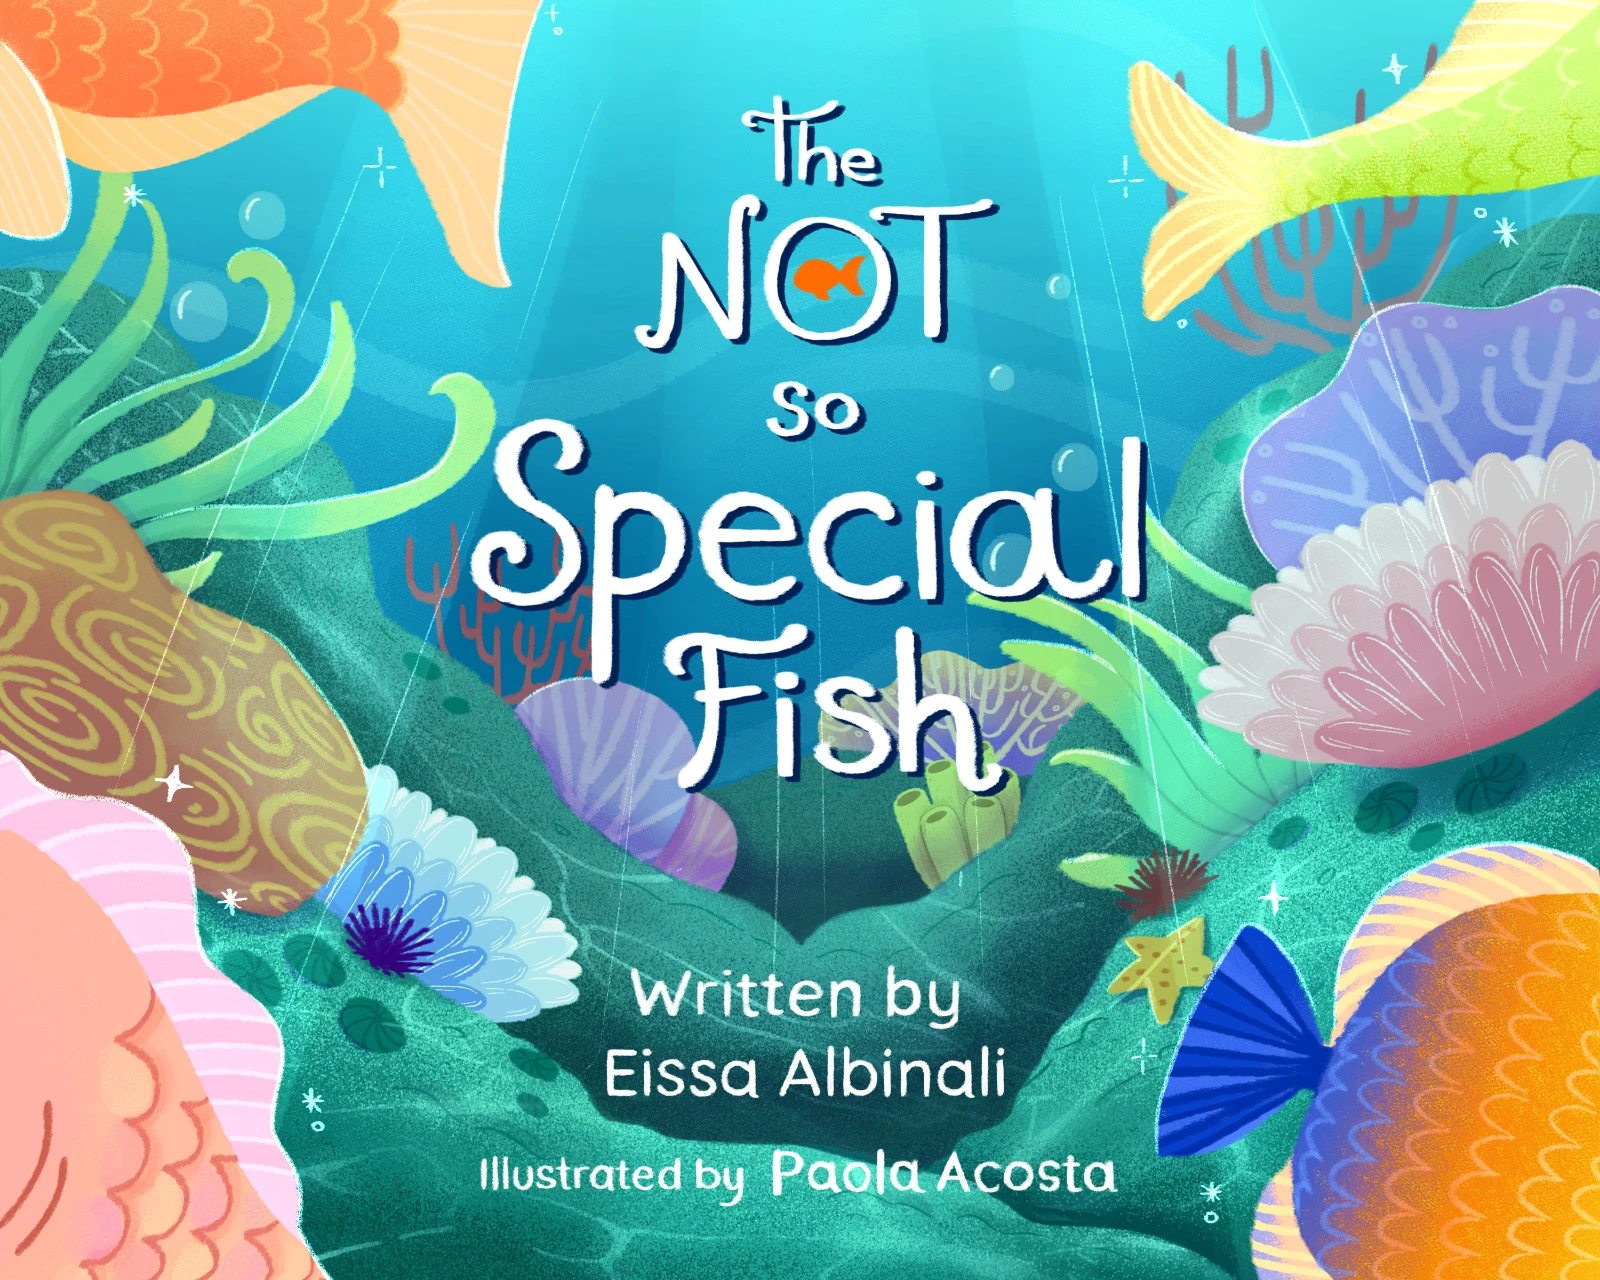 The Not So Special Fish